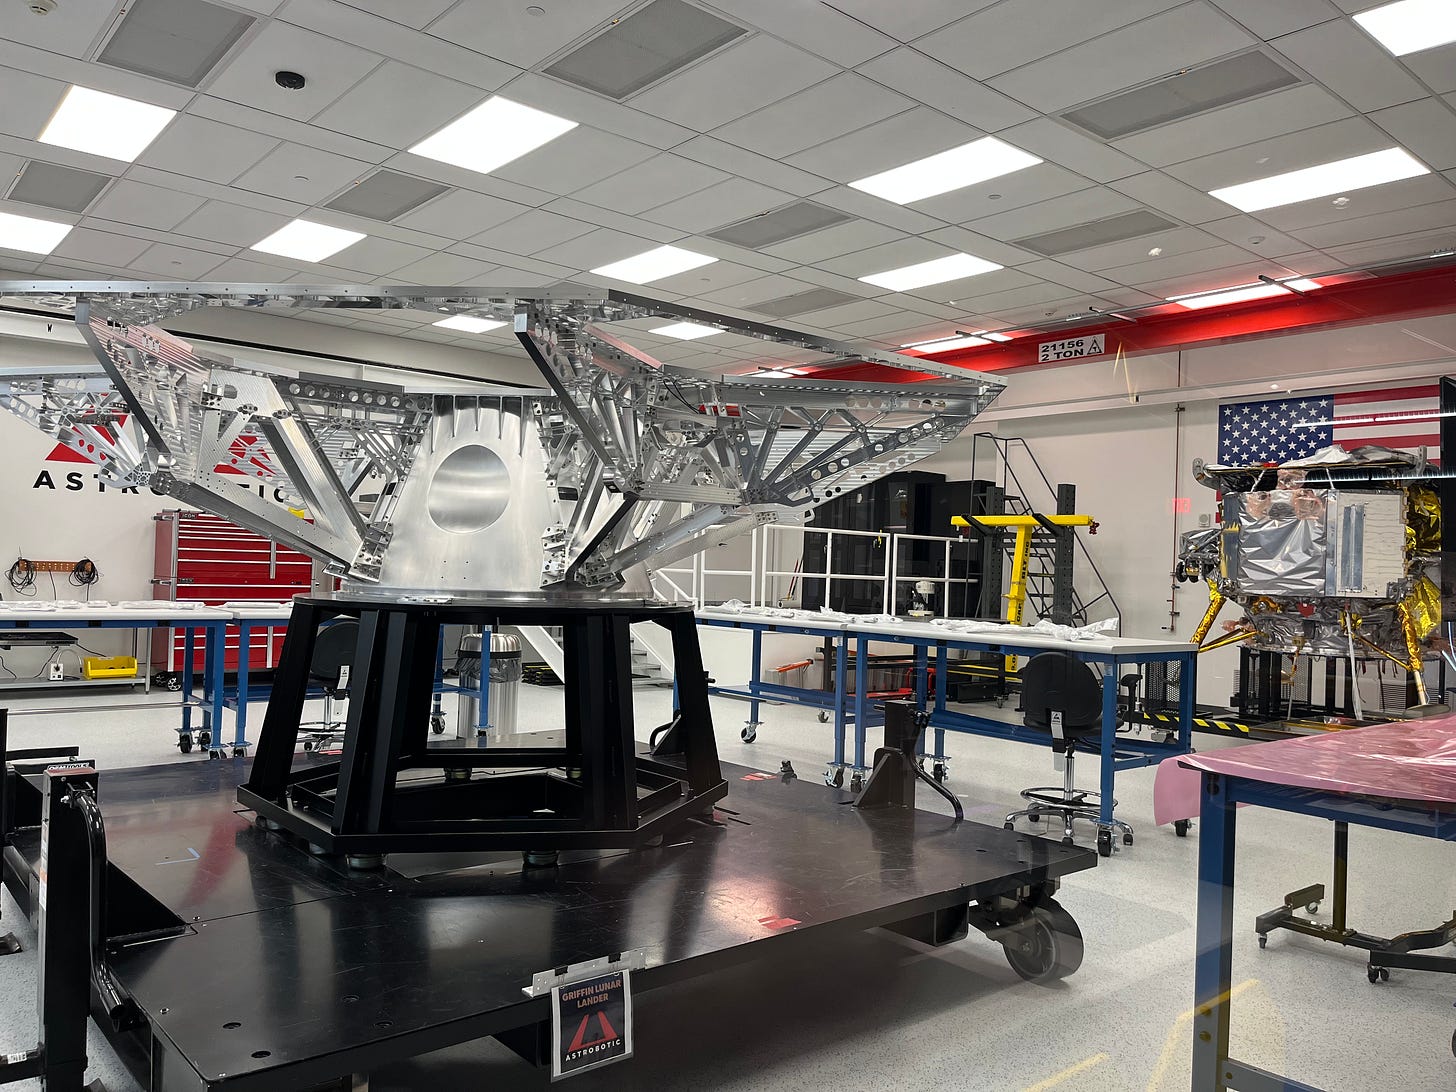 A photo of a smallish cleanroom. In the foreground is the bare metal skeleton of the Griffin lander, shaped roughly like a large satellite dish. In the background is the smaller but more complete Peregrine lander, a squat shiny silver box with spindly legs covered in gold foil.